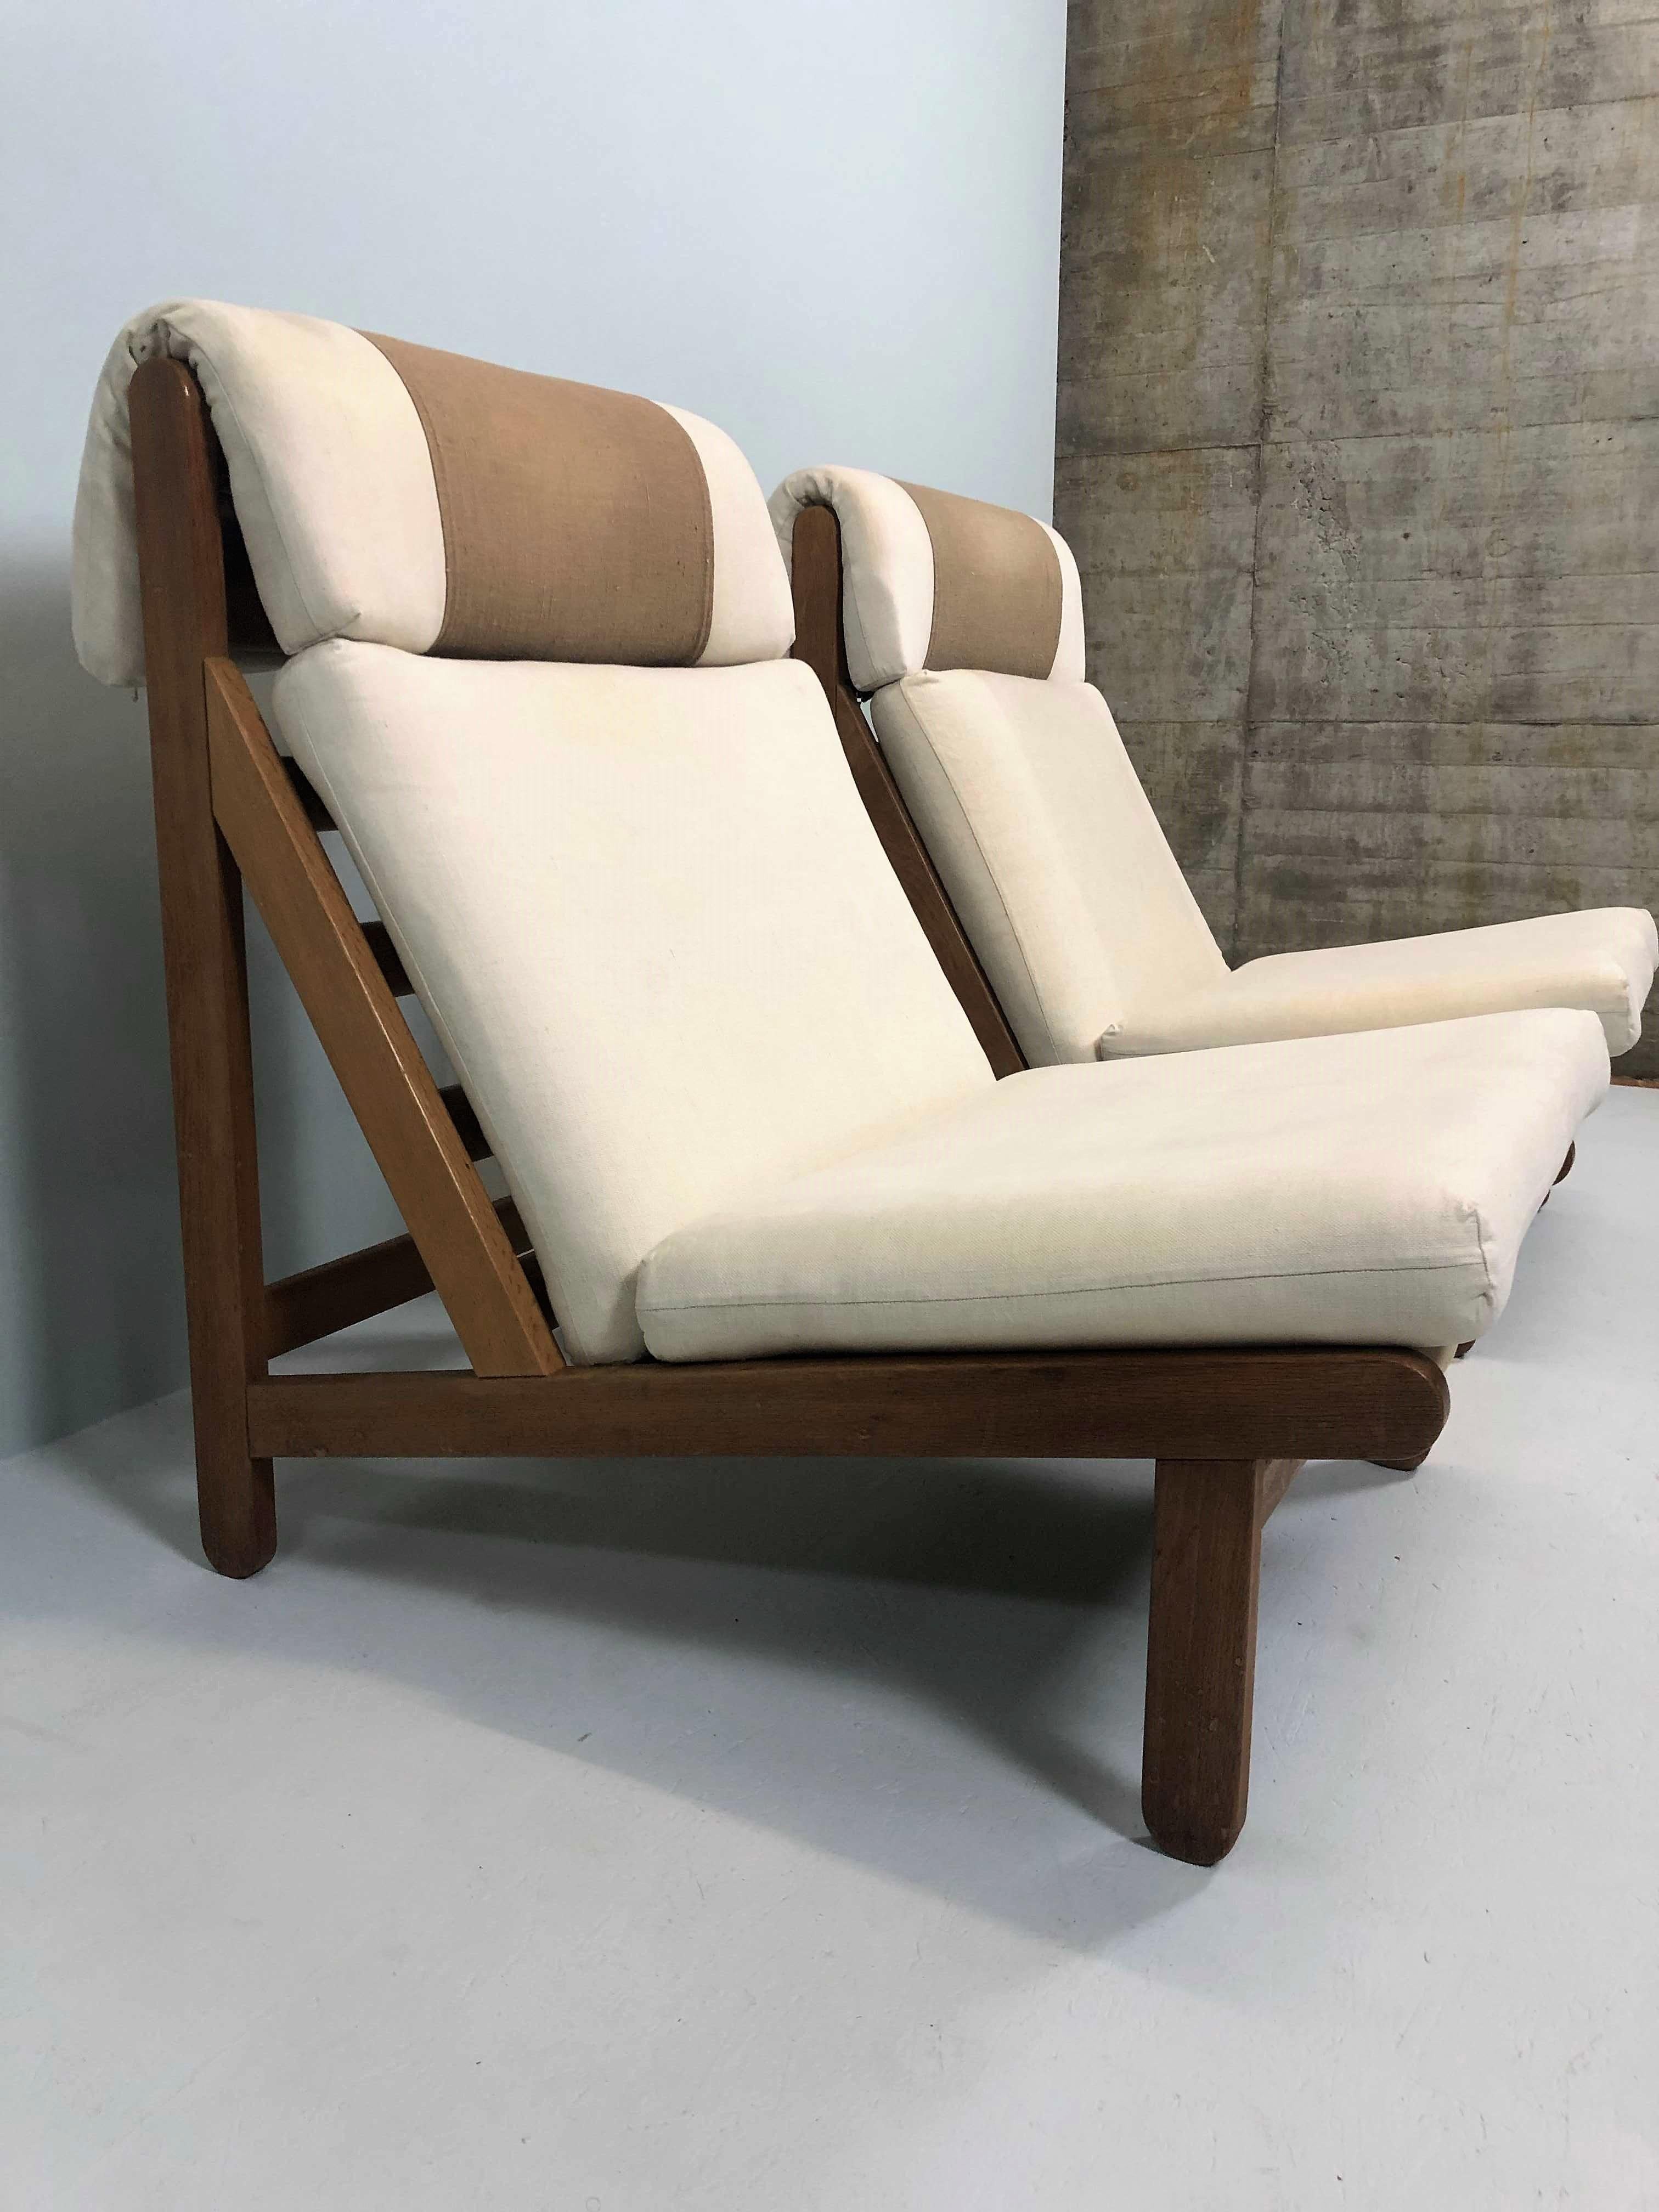 Rare and very sought after pair of easy lounge chair designed by Bernt Petersen for Schiang Furniture of Denmark in 1966. Collection Fuglsang. Marked. Oak frames with loose cushions in seat and back upholstered with an off-white colored heavy